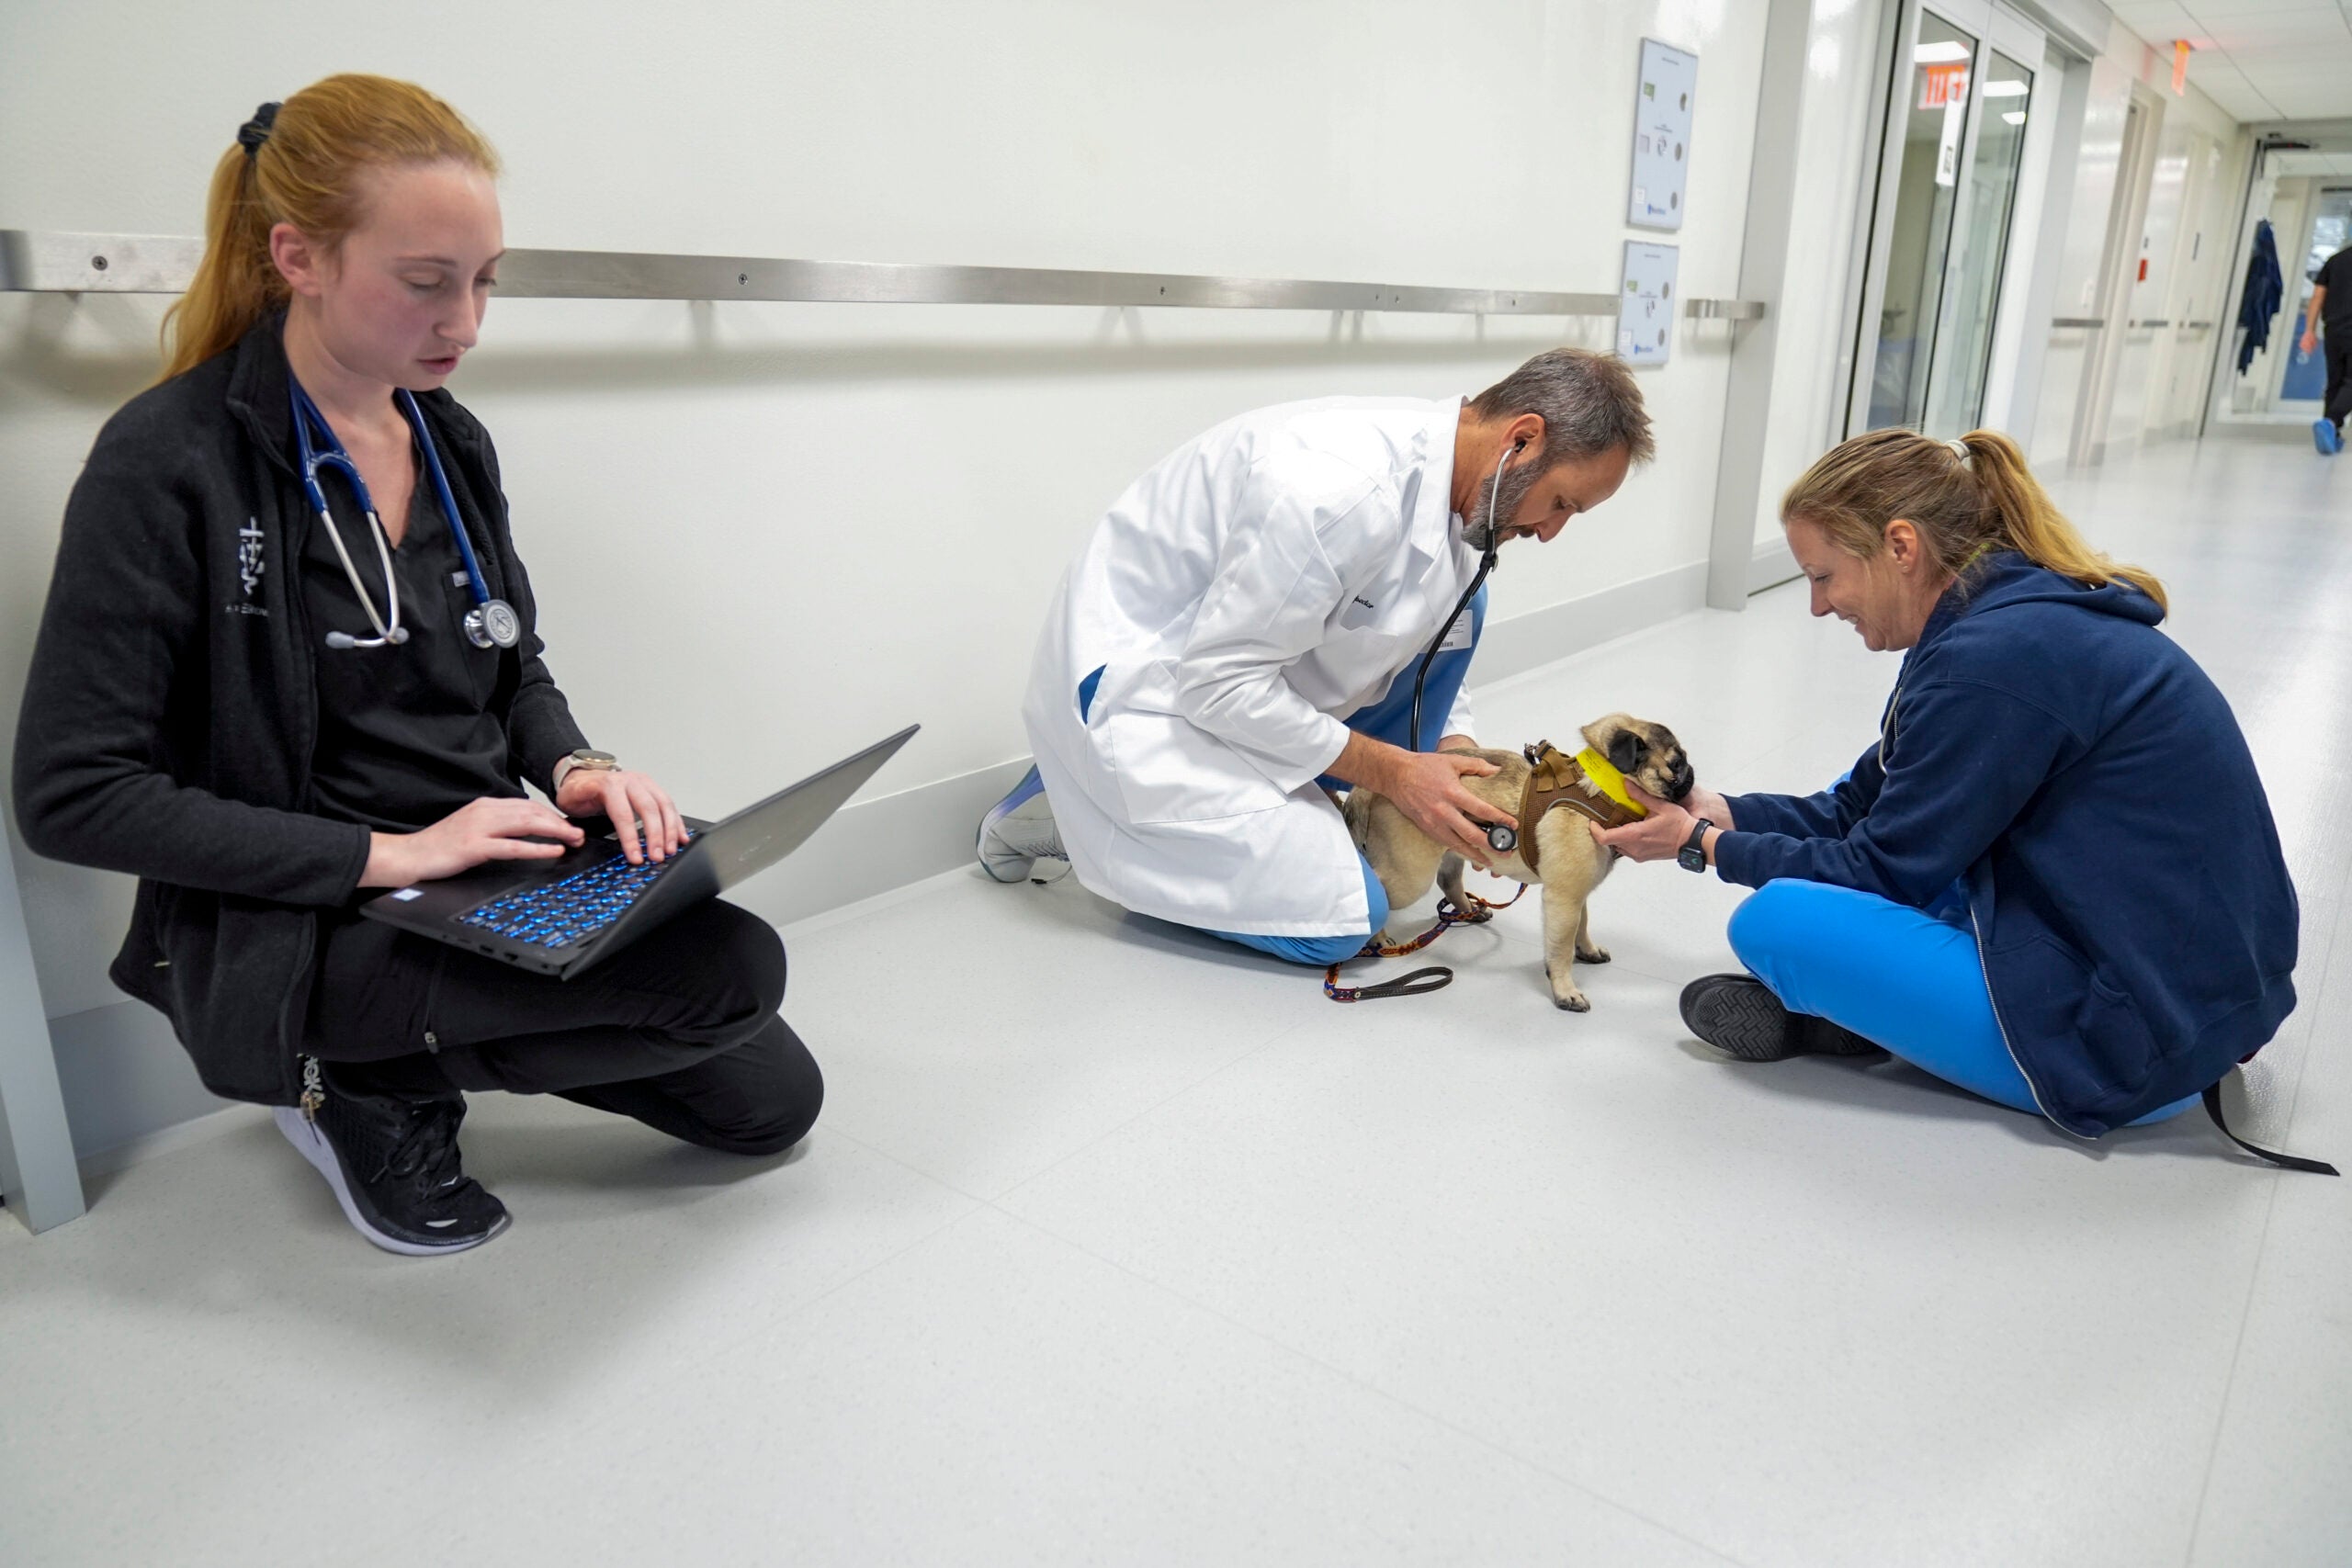 Veterinarian surgeon Dr. Daniel Spector, center, with members of the surgical team Lauren Reeves, right, and Allison Elkowitz examine Tiny, a pug, in the surgery prep room. 